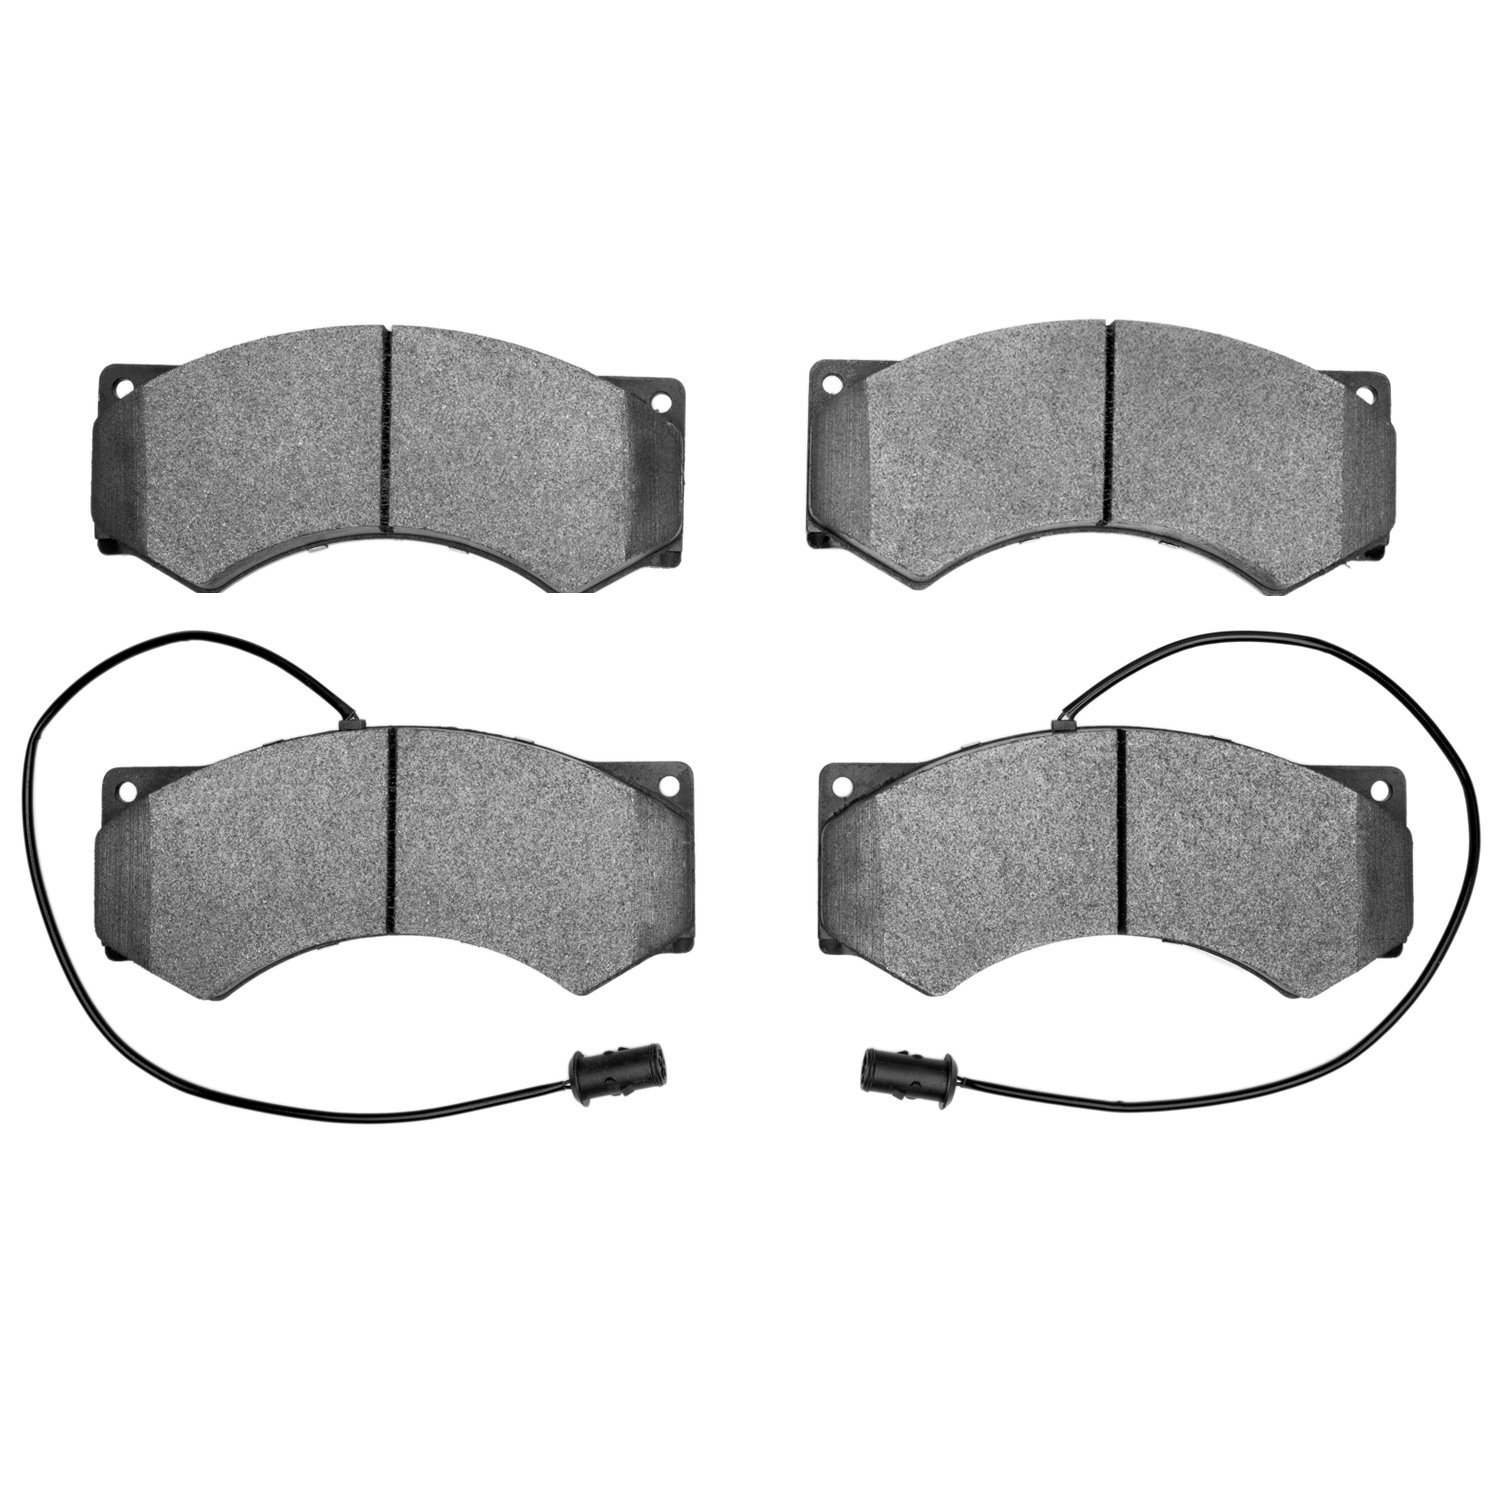 Super-Duty Brake Pads, 1987-1991 Iveco, Position: Front